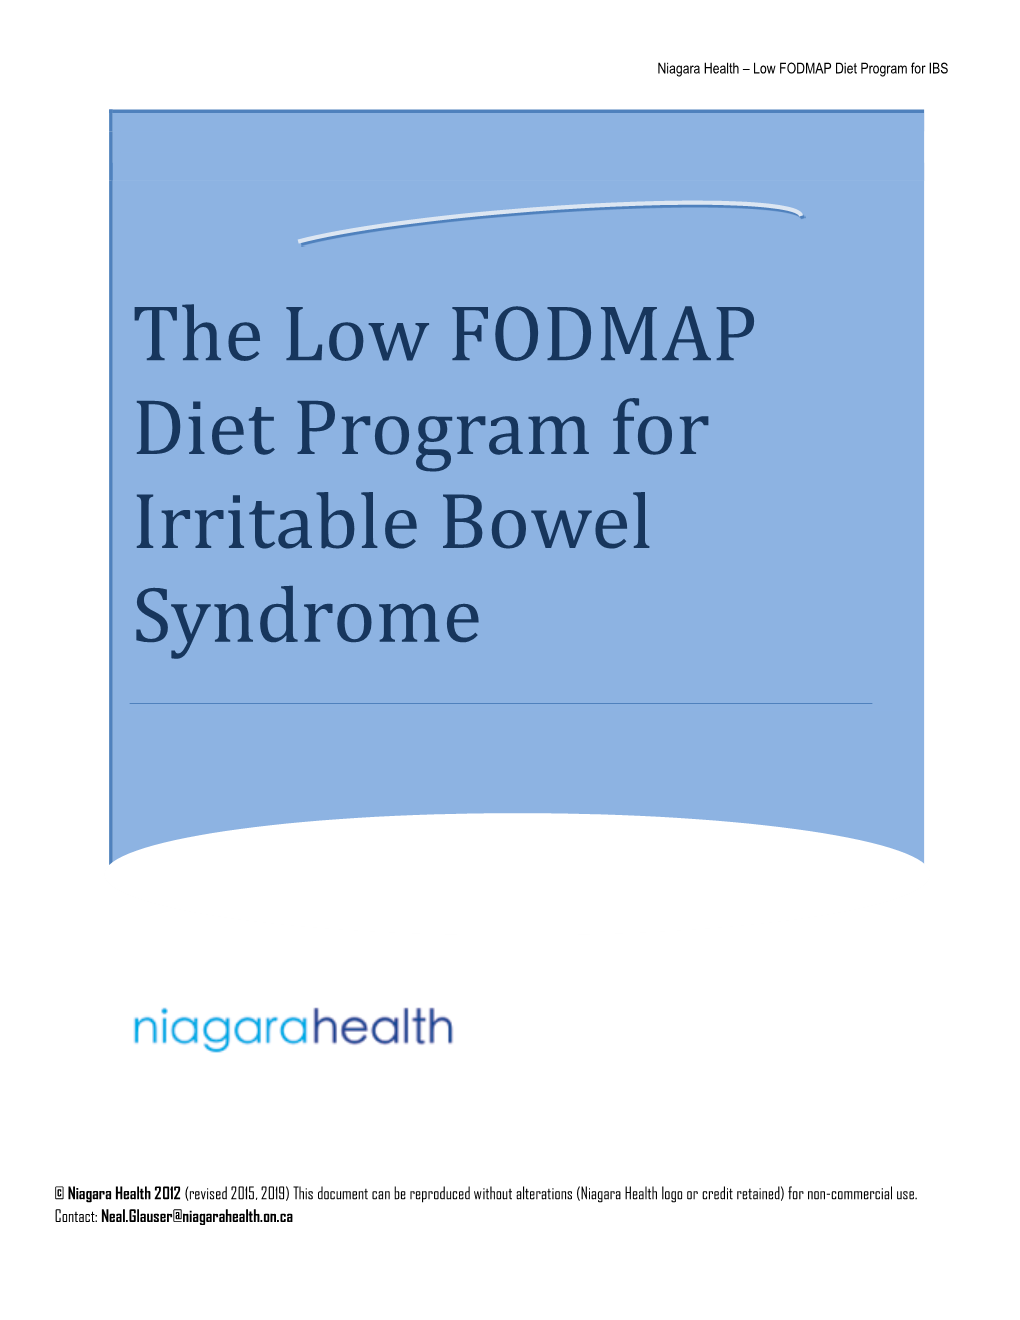 The Low FODMAP Diet Program for Irritable Bowel Syndrome